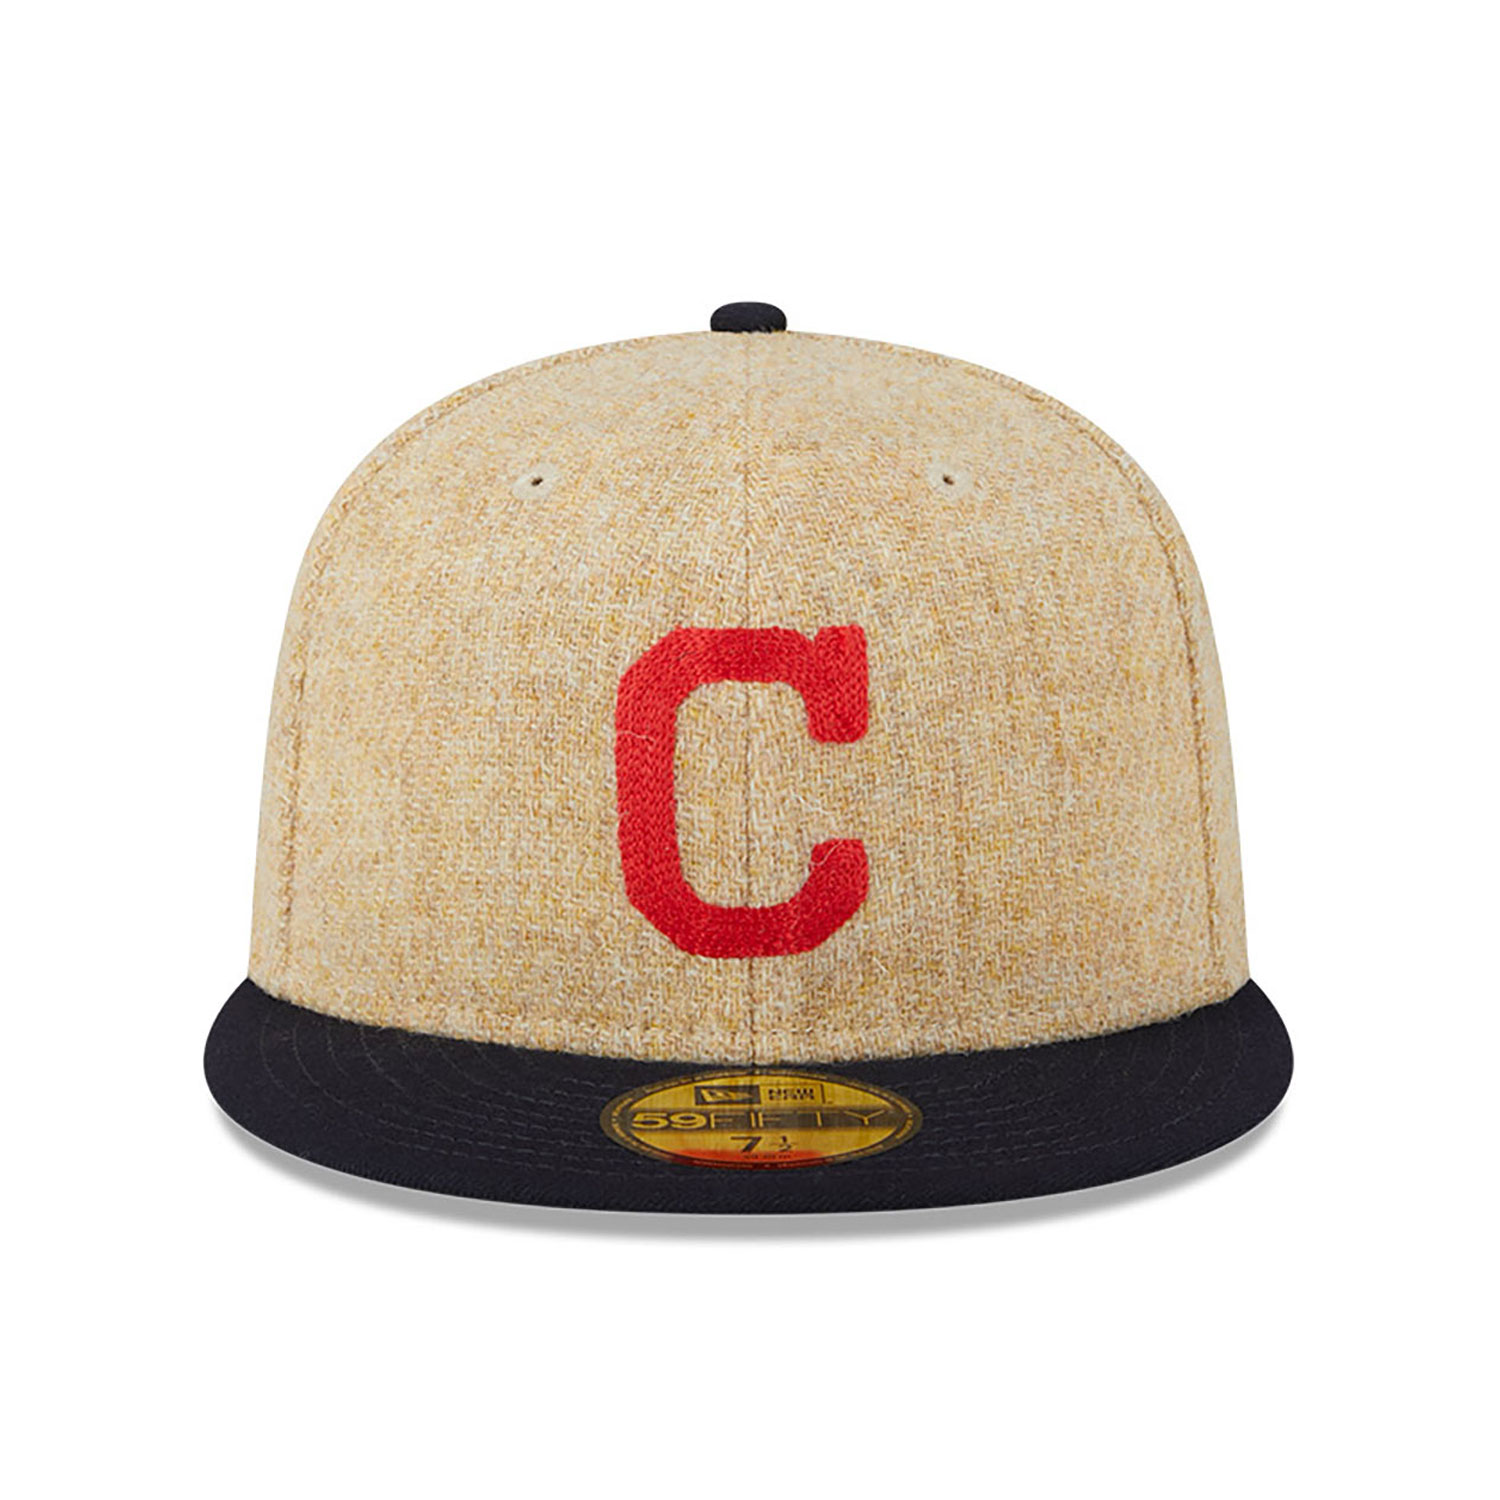 NEW ERA 59FIFTY MLB AUTHENTIC CLEVELAND INDIANS TEAM FITTED CAP